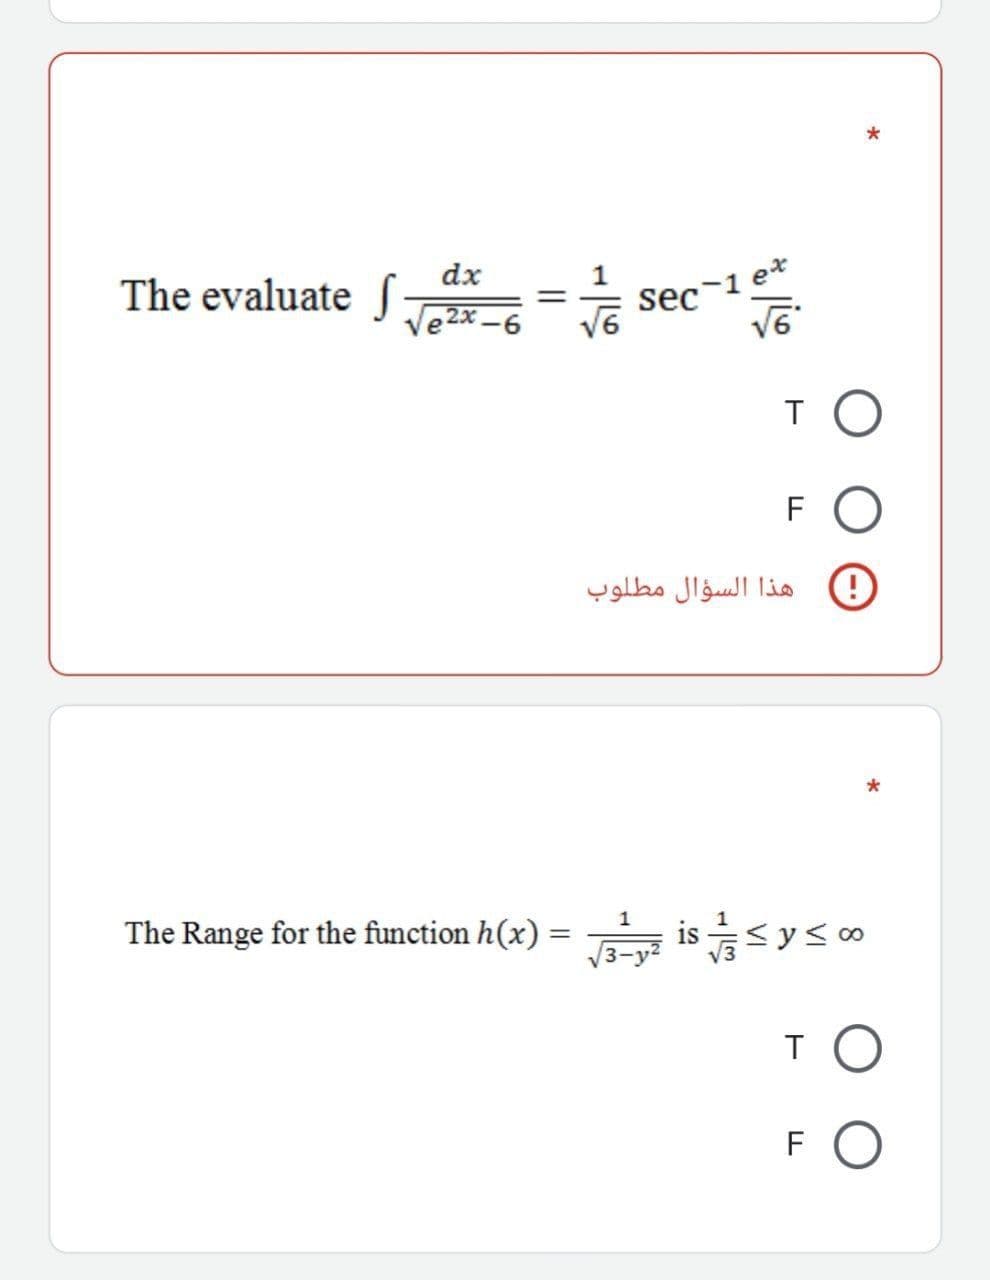 dx
The evaluate J 2x-6
sec-1 e*
TO
هذا السؤال مطلوب
The Range for the function h(x) = is<ys0
1
syso
%3D
T
